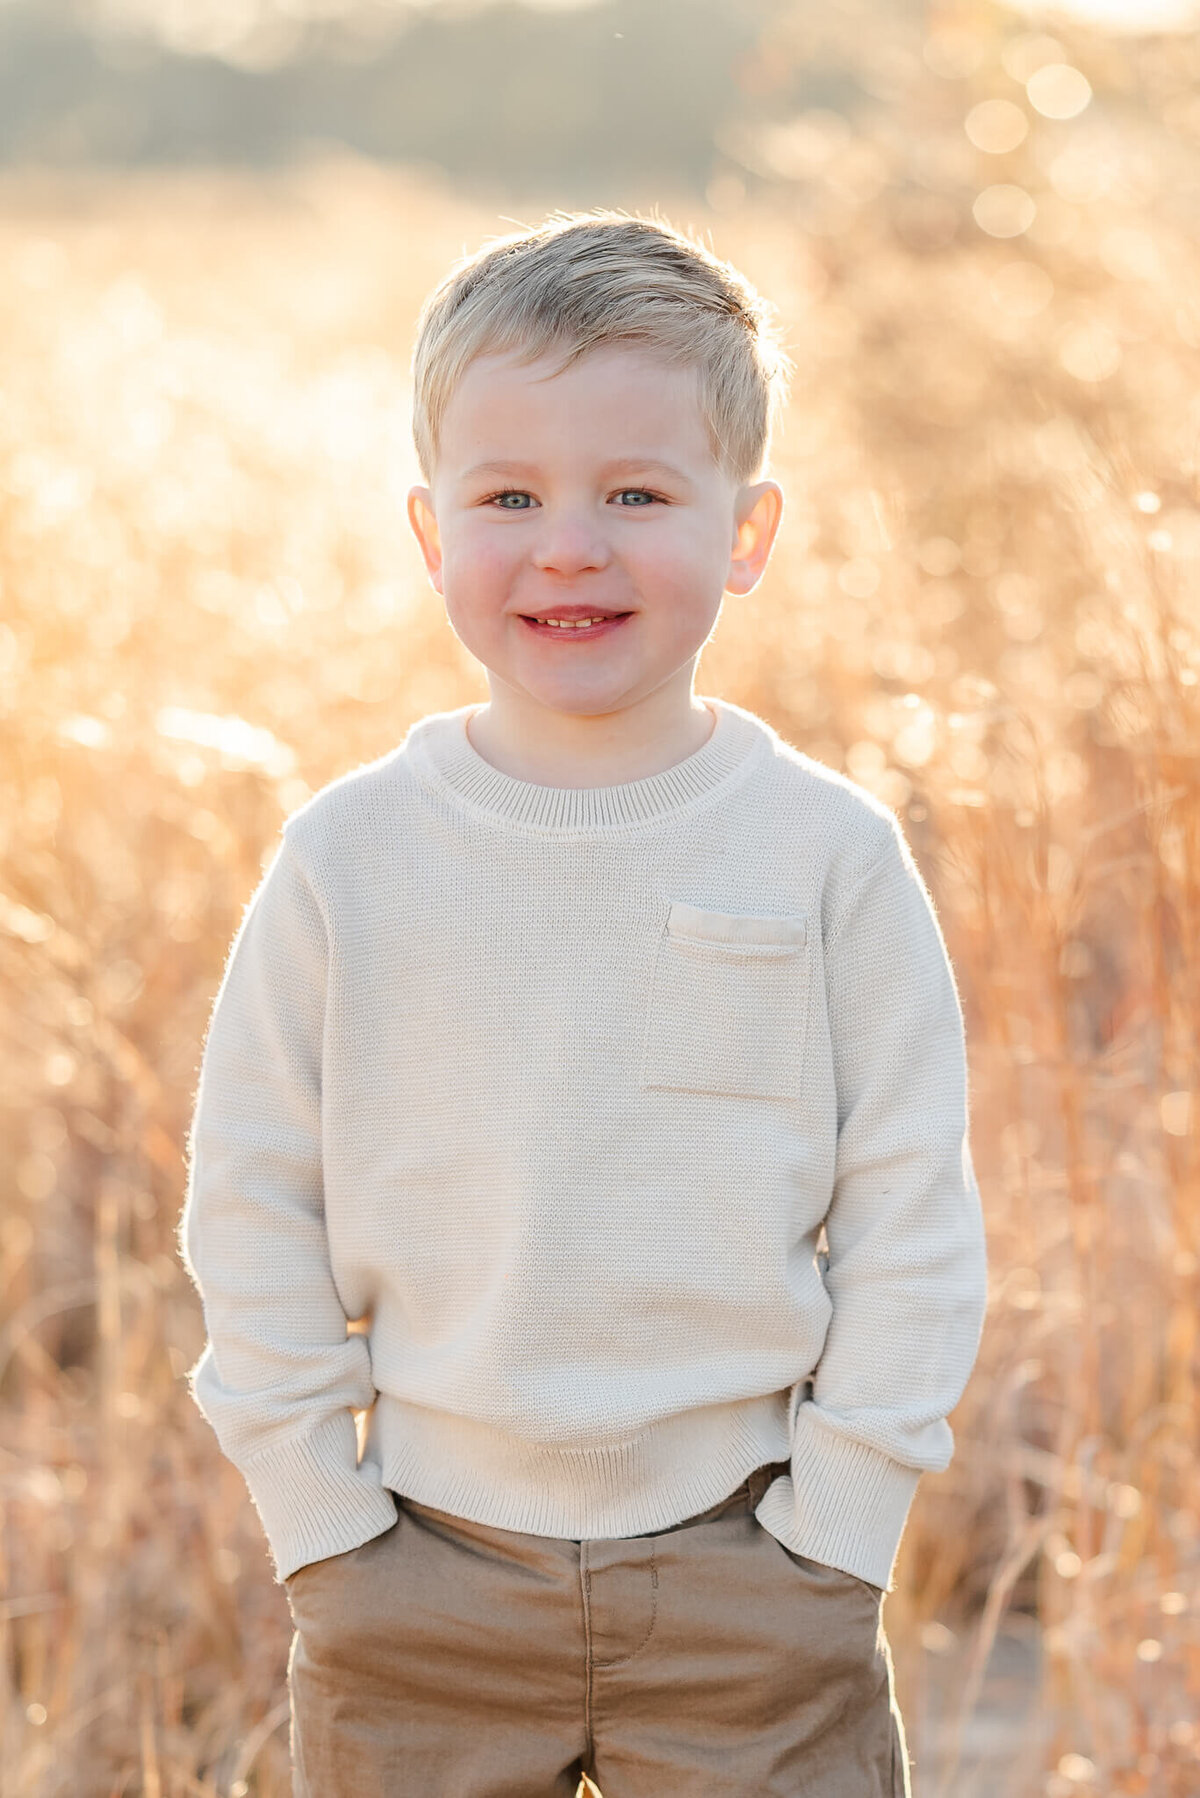 A young boy, wearing khakis and a long sleeve off-white shirt, puts his hands in his pockets and smiles. Photo captured by Justine Renee Photography in Norfolk, VA.